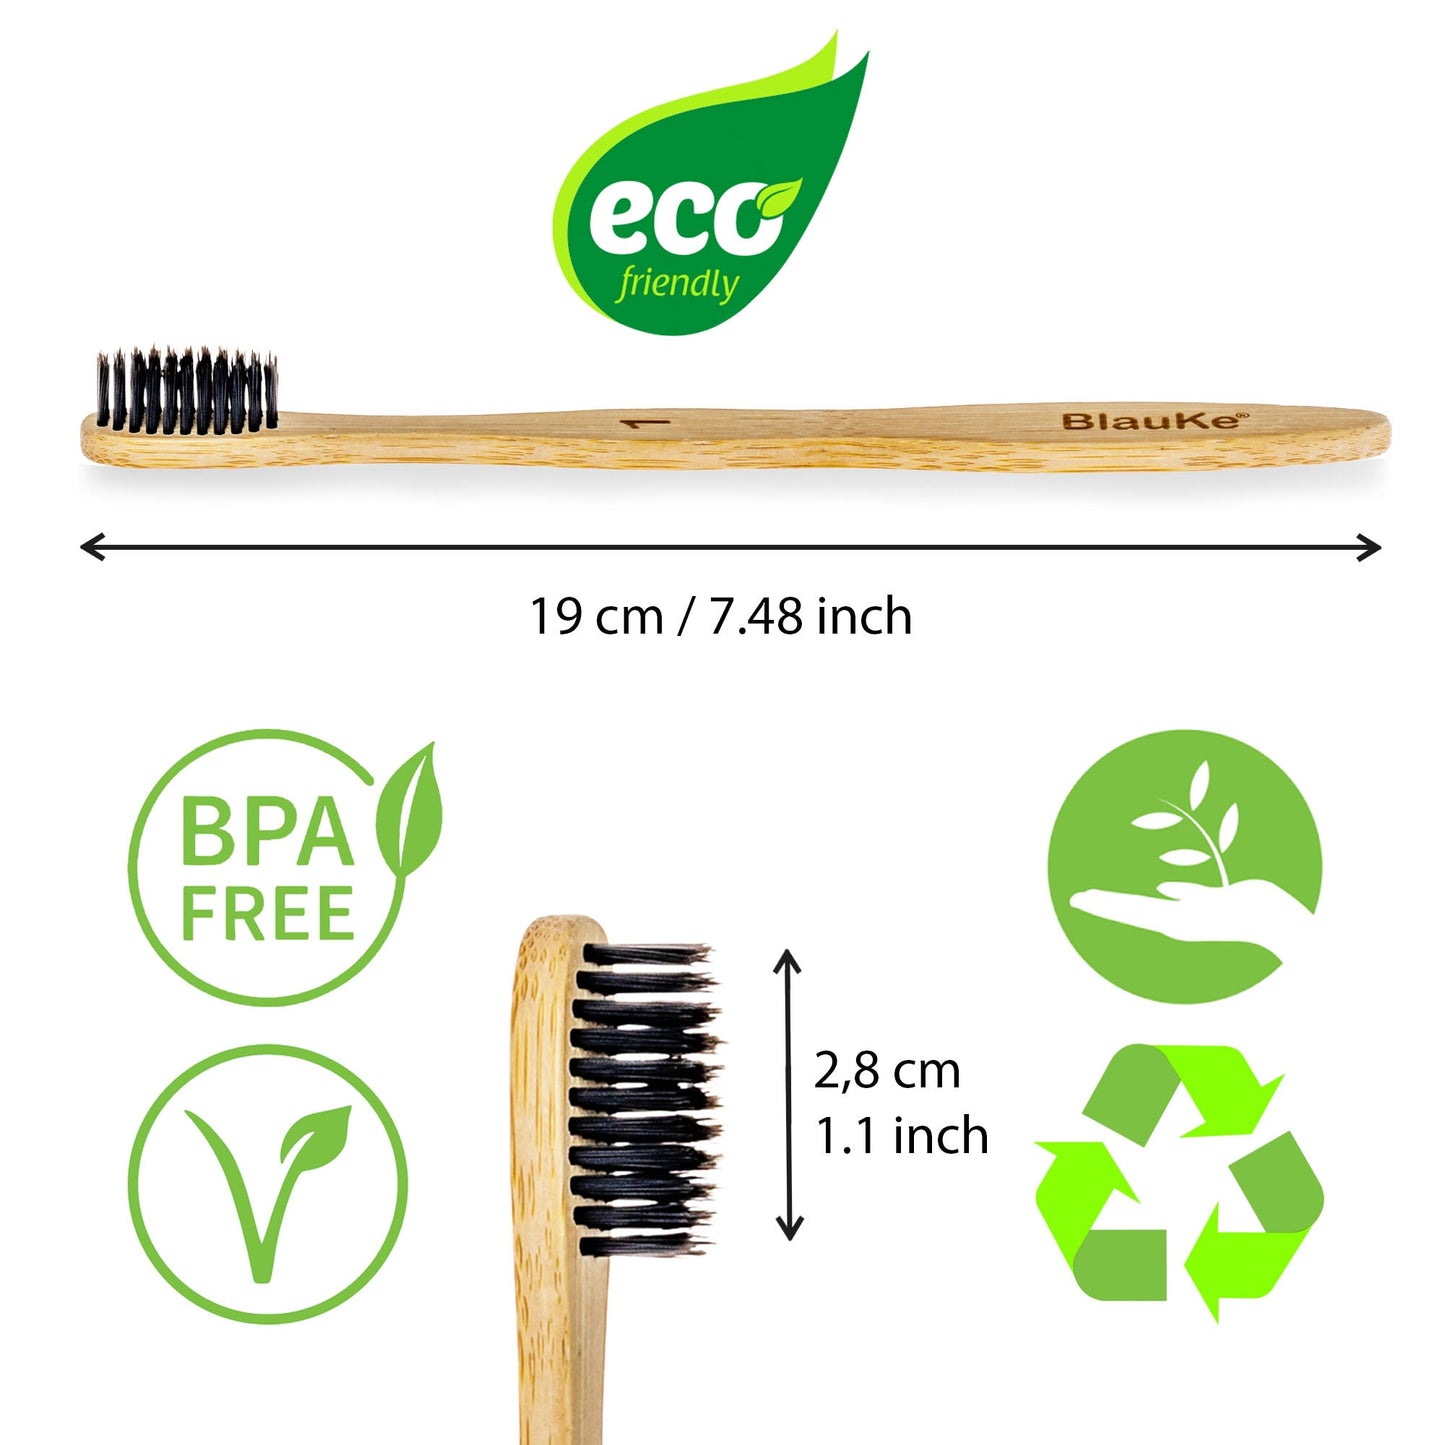 Bamboo Toothbrush Set 4-Pack - Bamboo Toothbrushes with Soft Bristles for Adults - Eco-Friendly, Biodegradable, Natural Wooden Toothbrushes-2